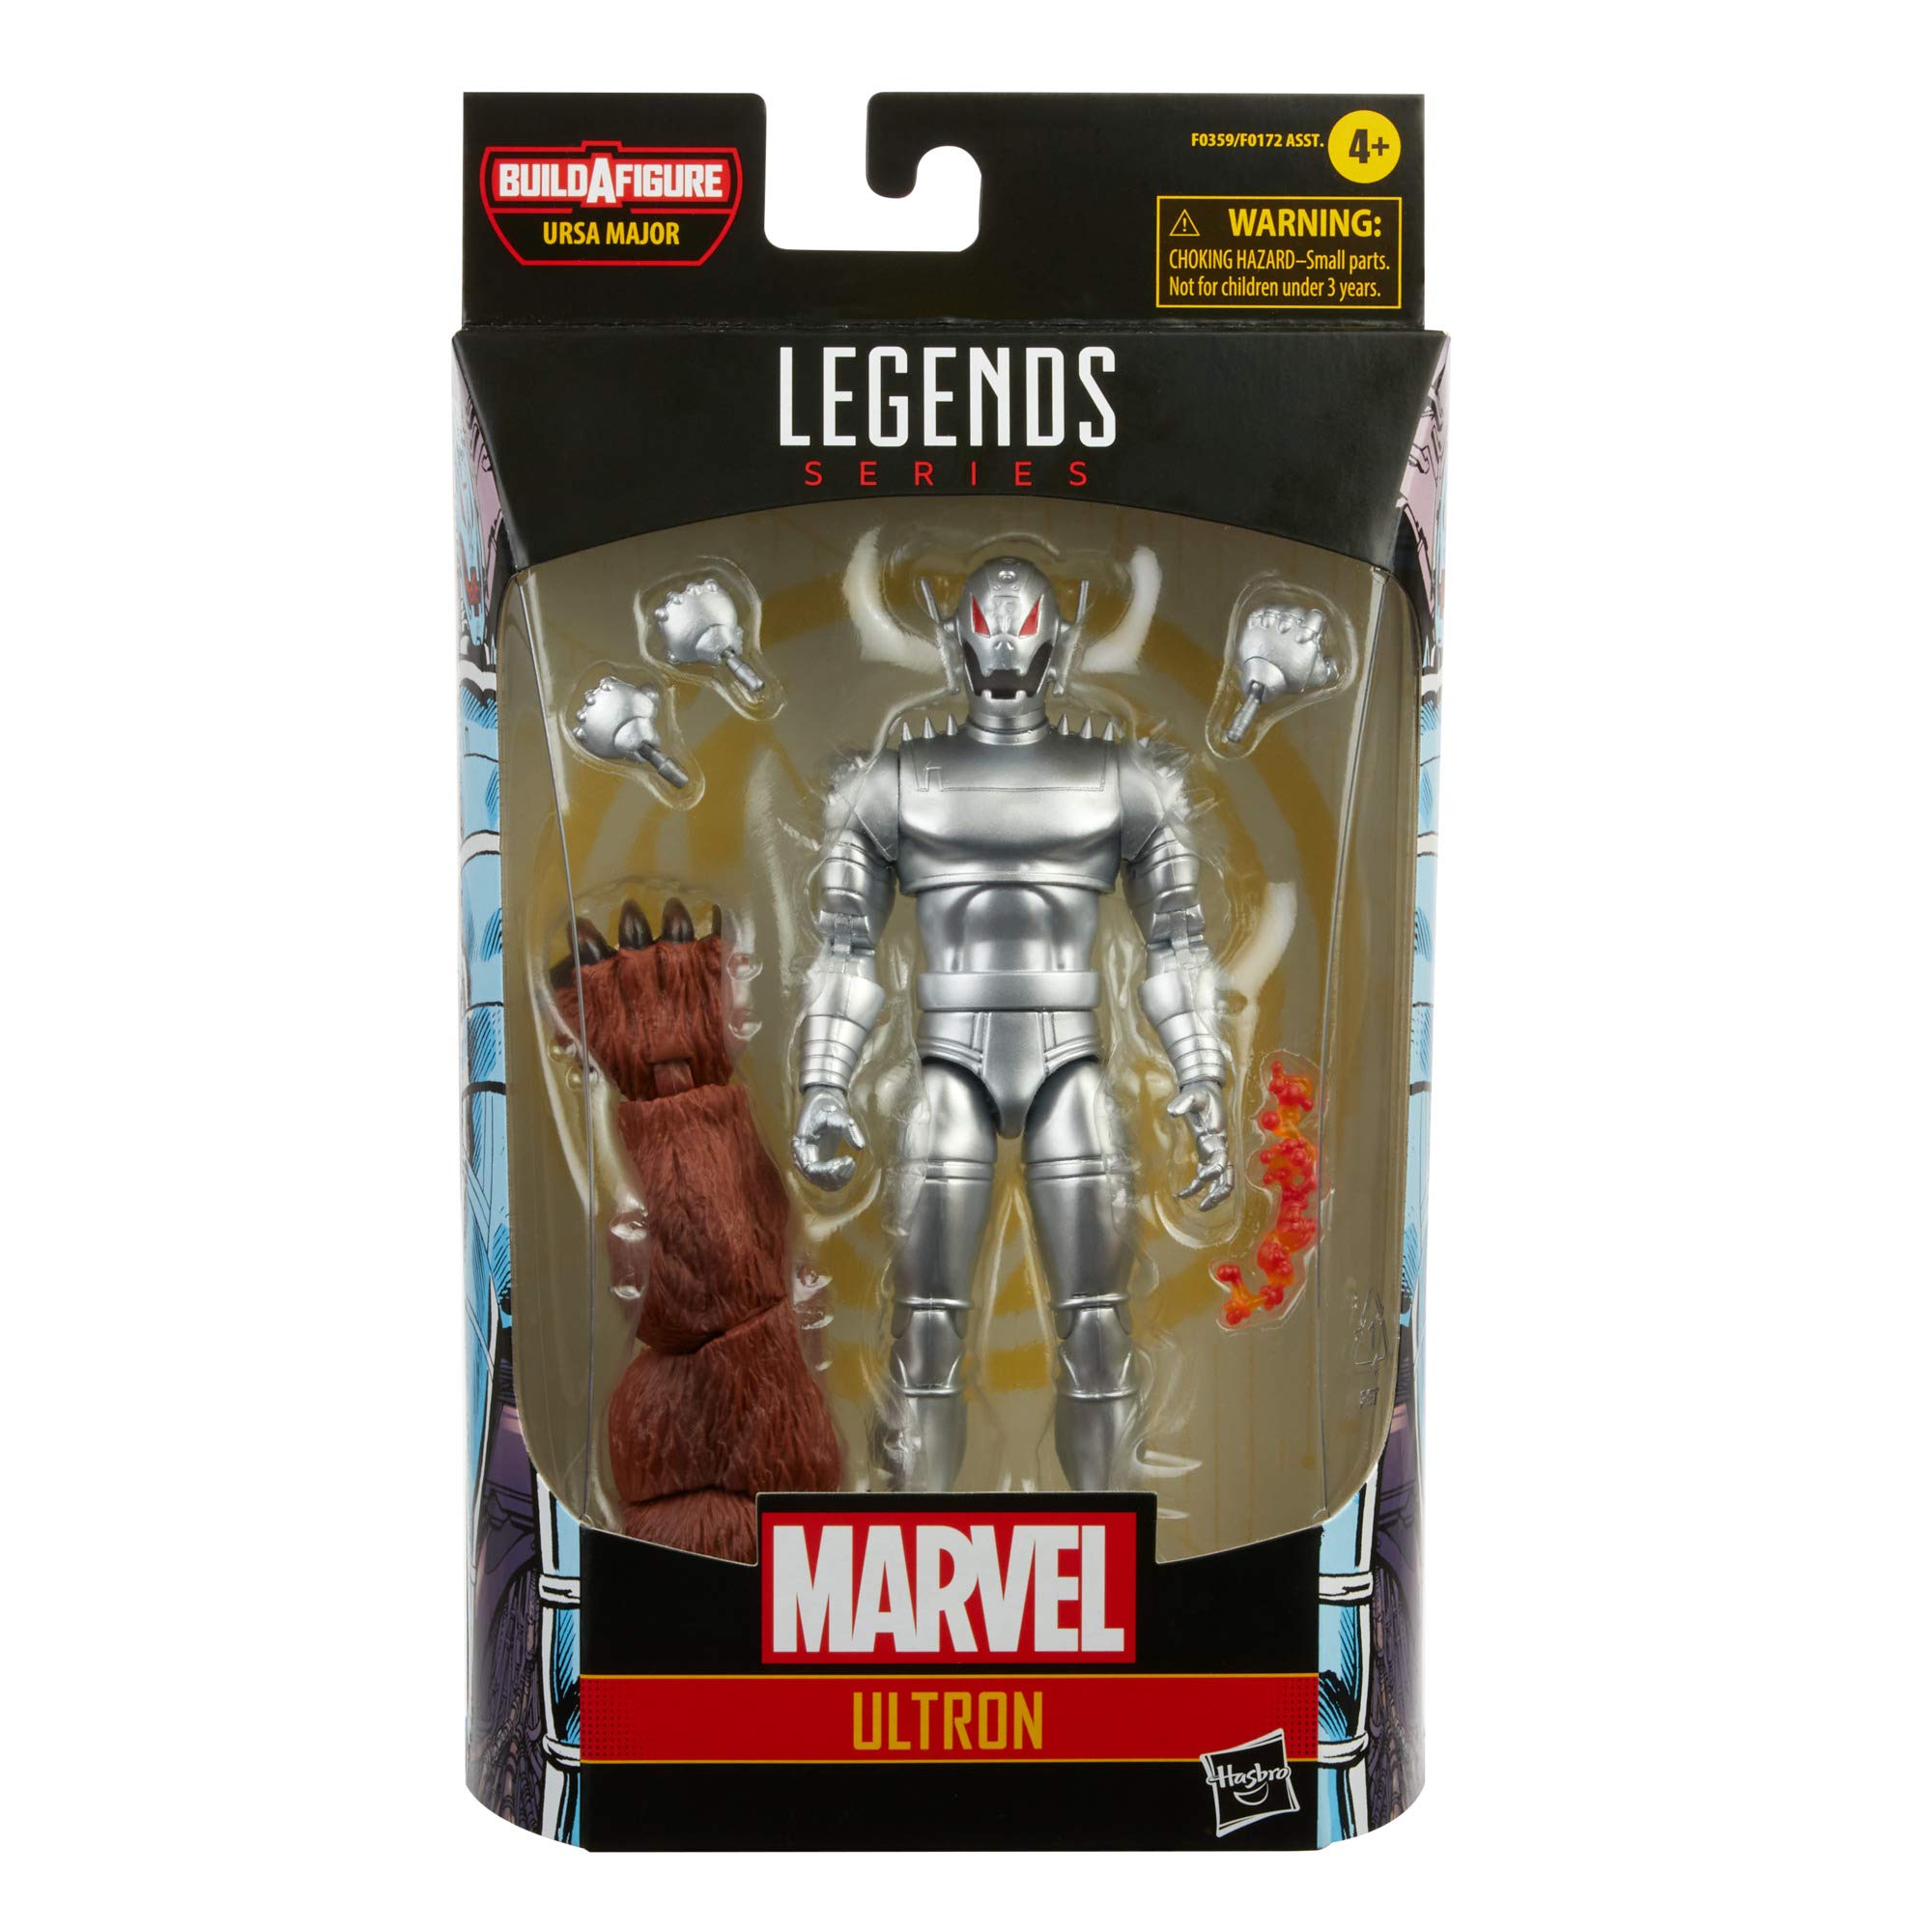 Marvel Hasbro Legends Series 6-inch Ultron Action Figure Toy, Premium Design and Articulation, Includes 5 Accessories and Build-A-Figure Part